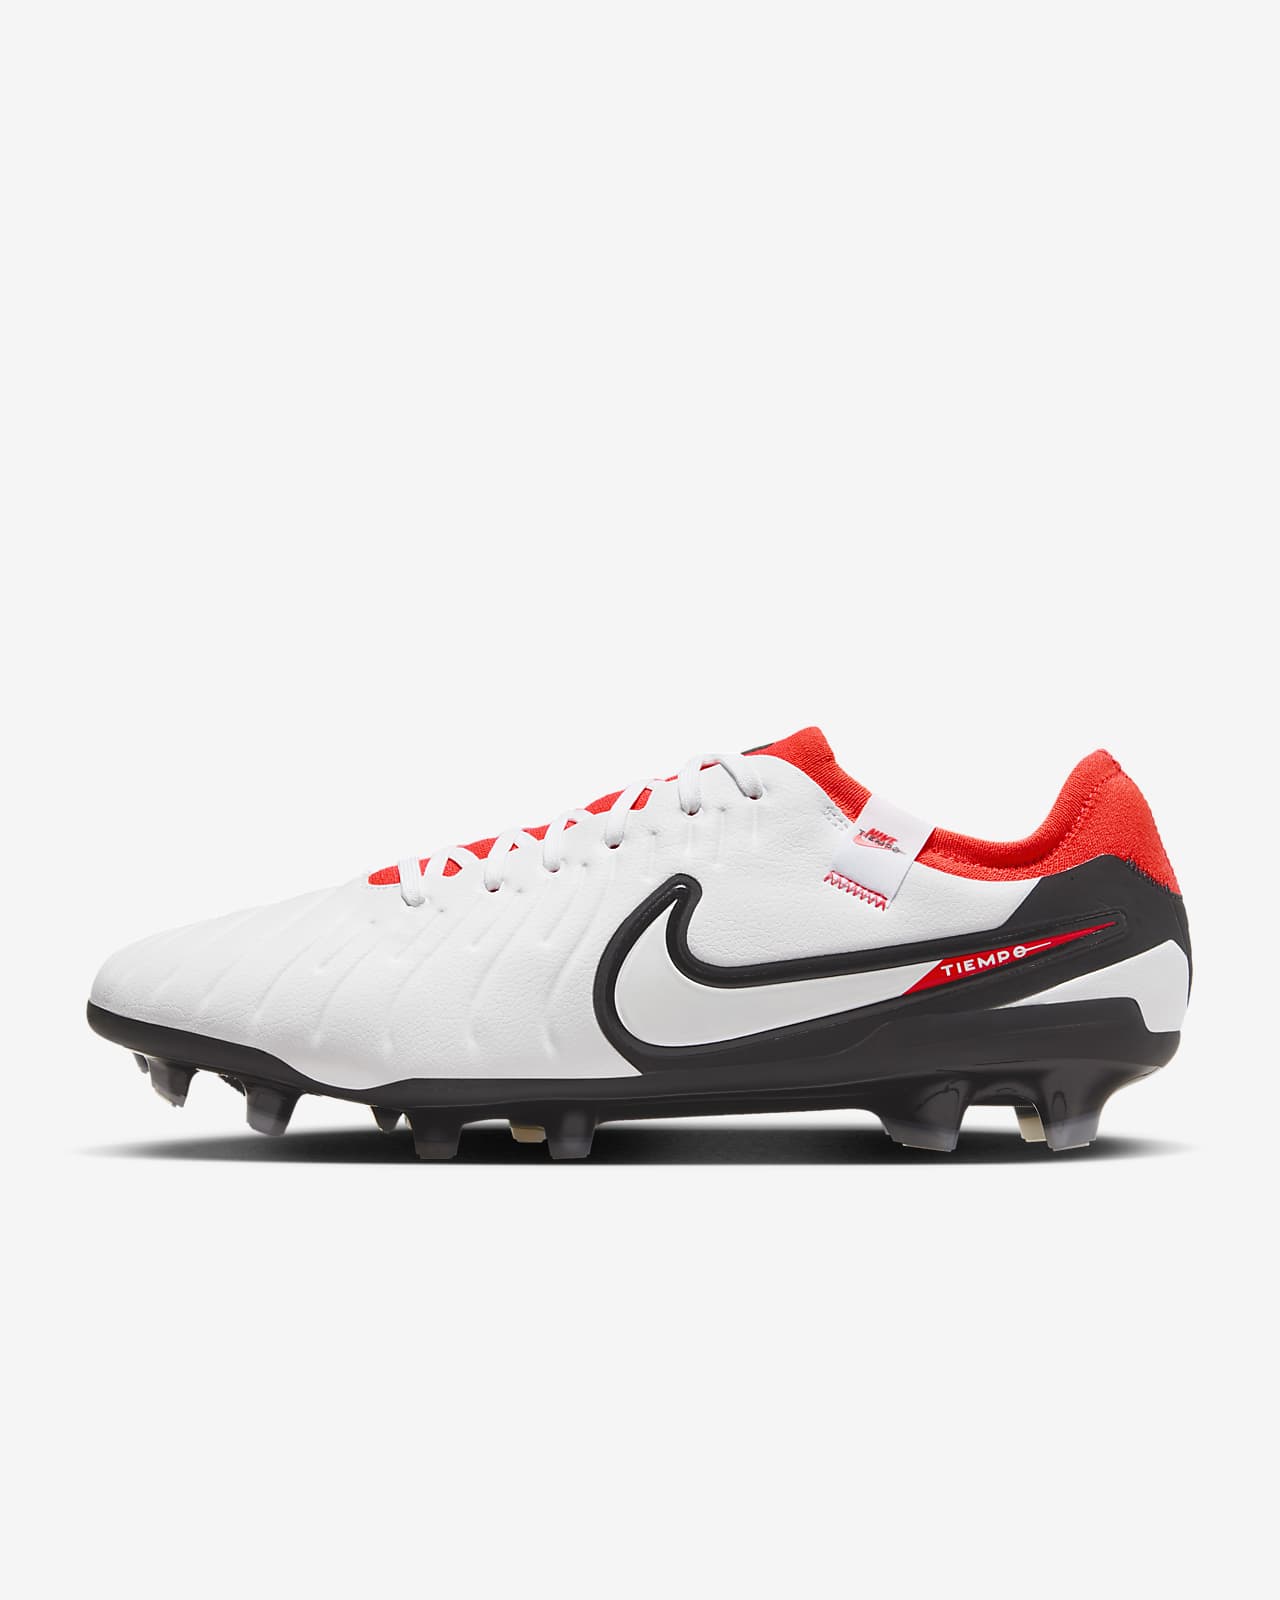 Nike Tiempo Legend 10 Pro Firm-Ground Low-Top Football Boot